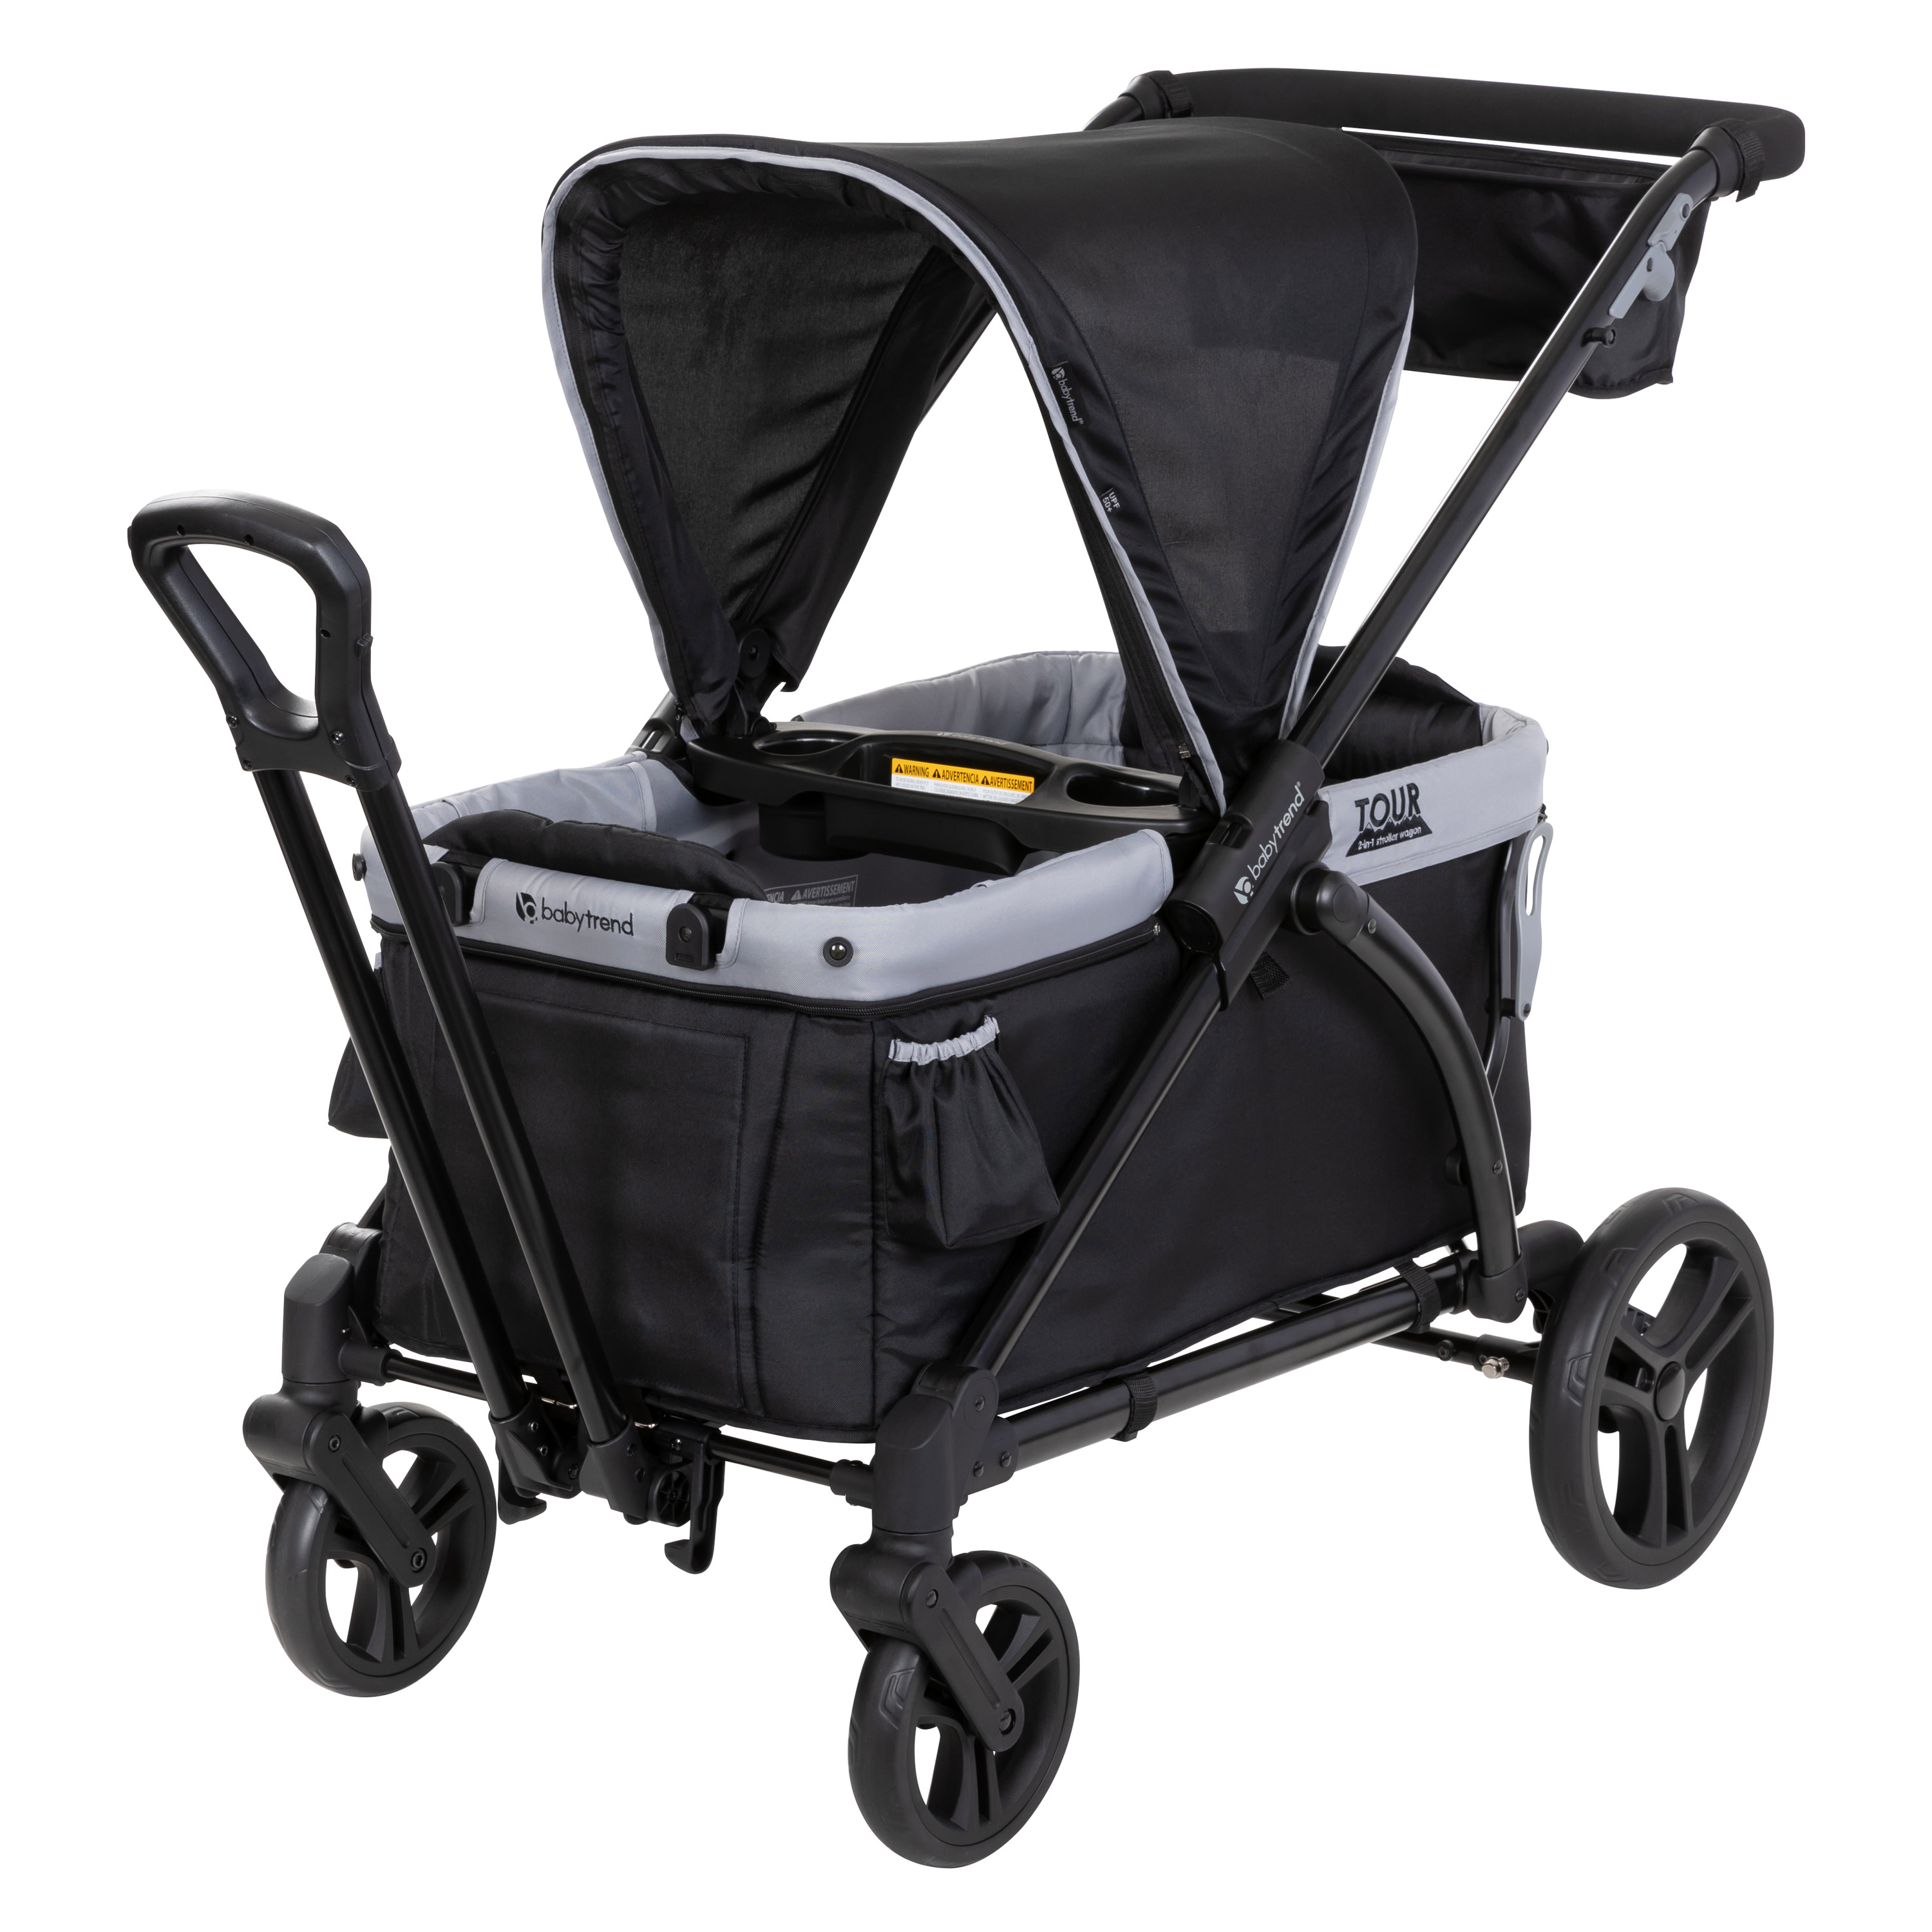 Baby Trend Tour Wagon Stroller, Black - image 1 of 18